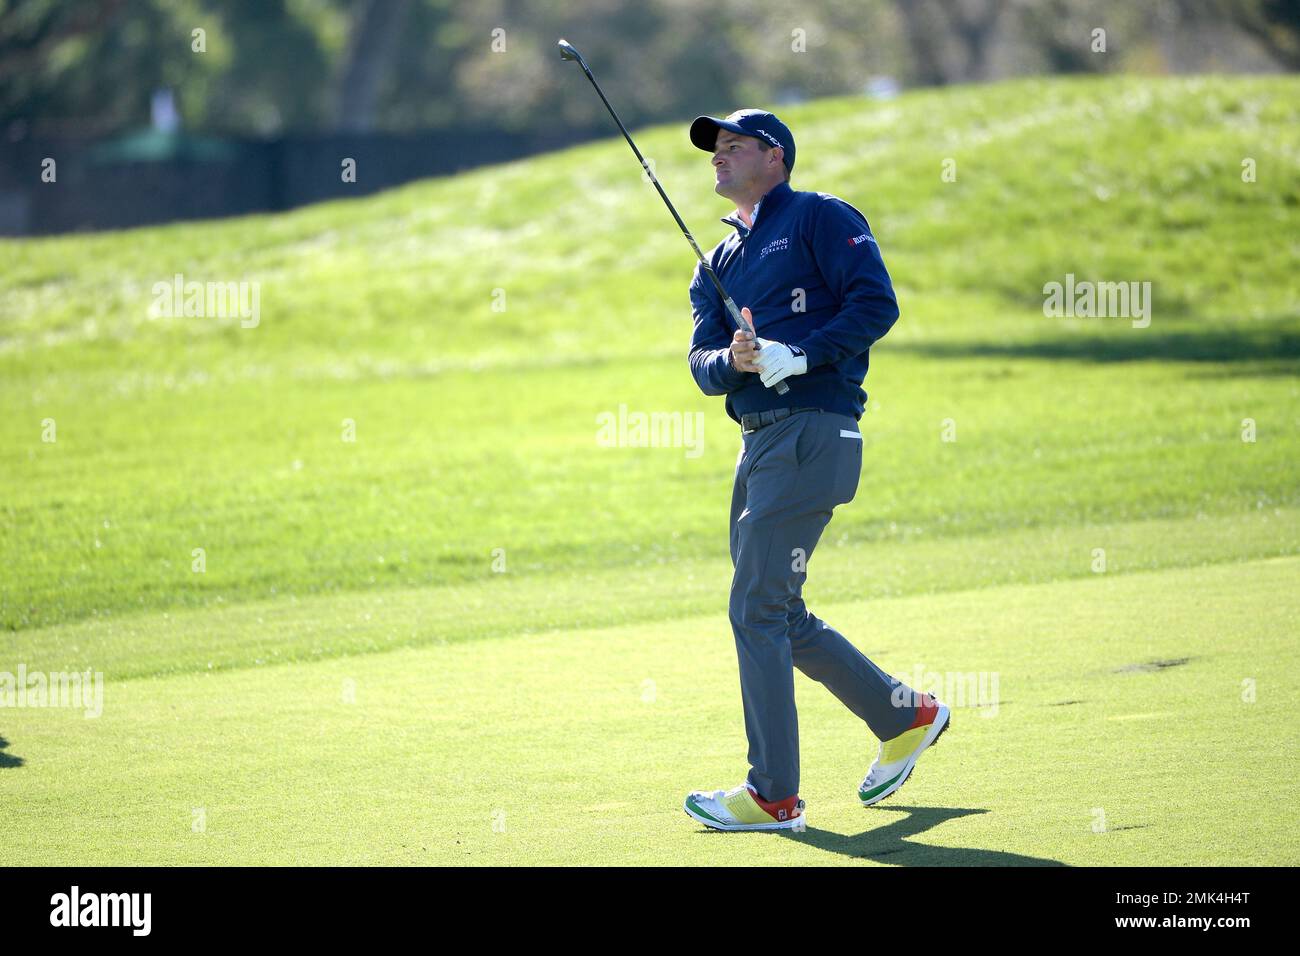 Sam Saunders, grandson of Arnold Palmer, watches his shot from the 18th  fairway during the first round of the Arnold Palmer Invitational golf  tournament Thursday, March 7, 2019, in Orlando, Fla. (AP